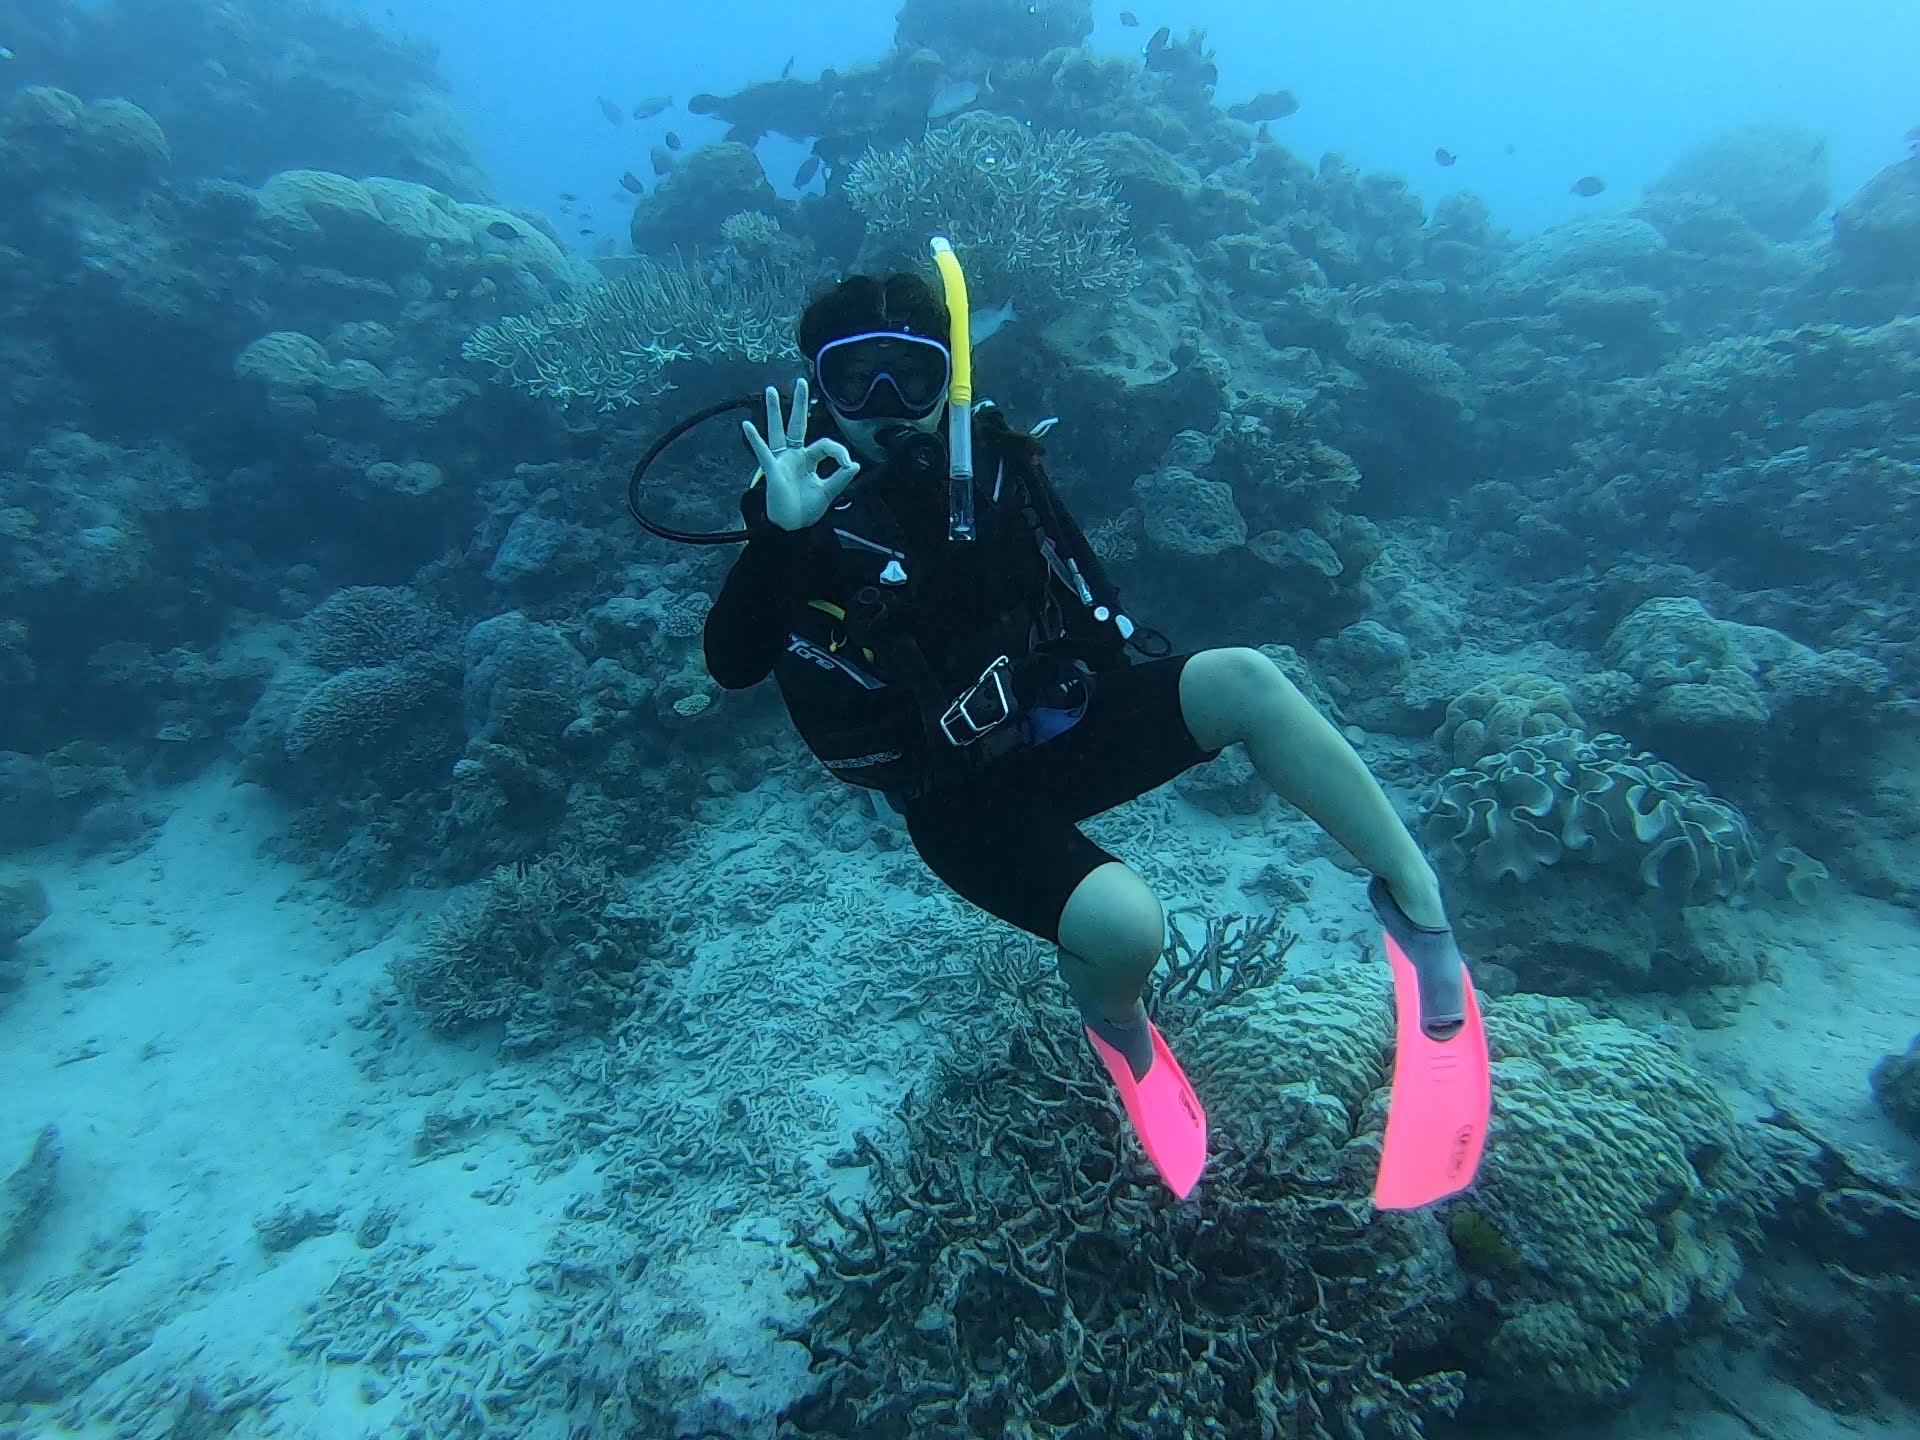 Scuba diving on the great barrier reef!